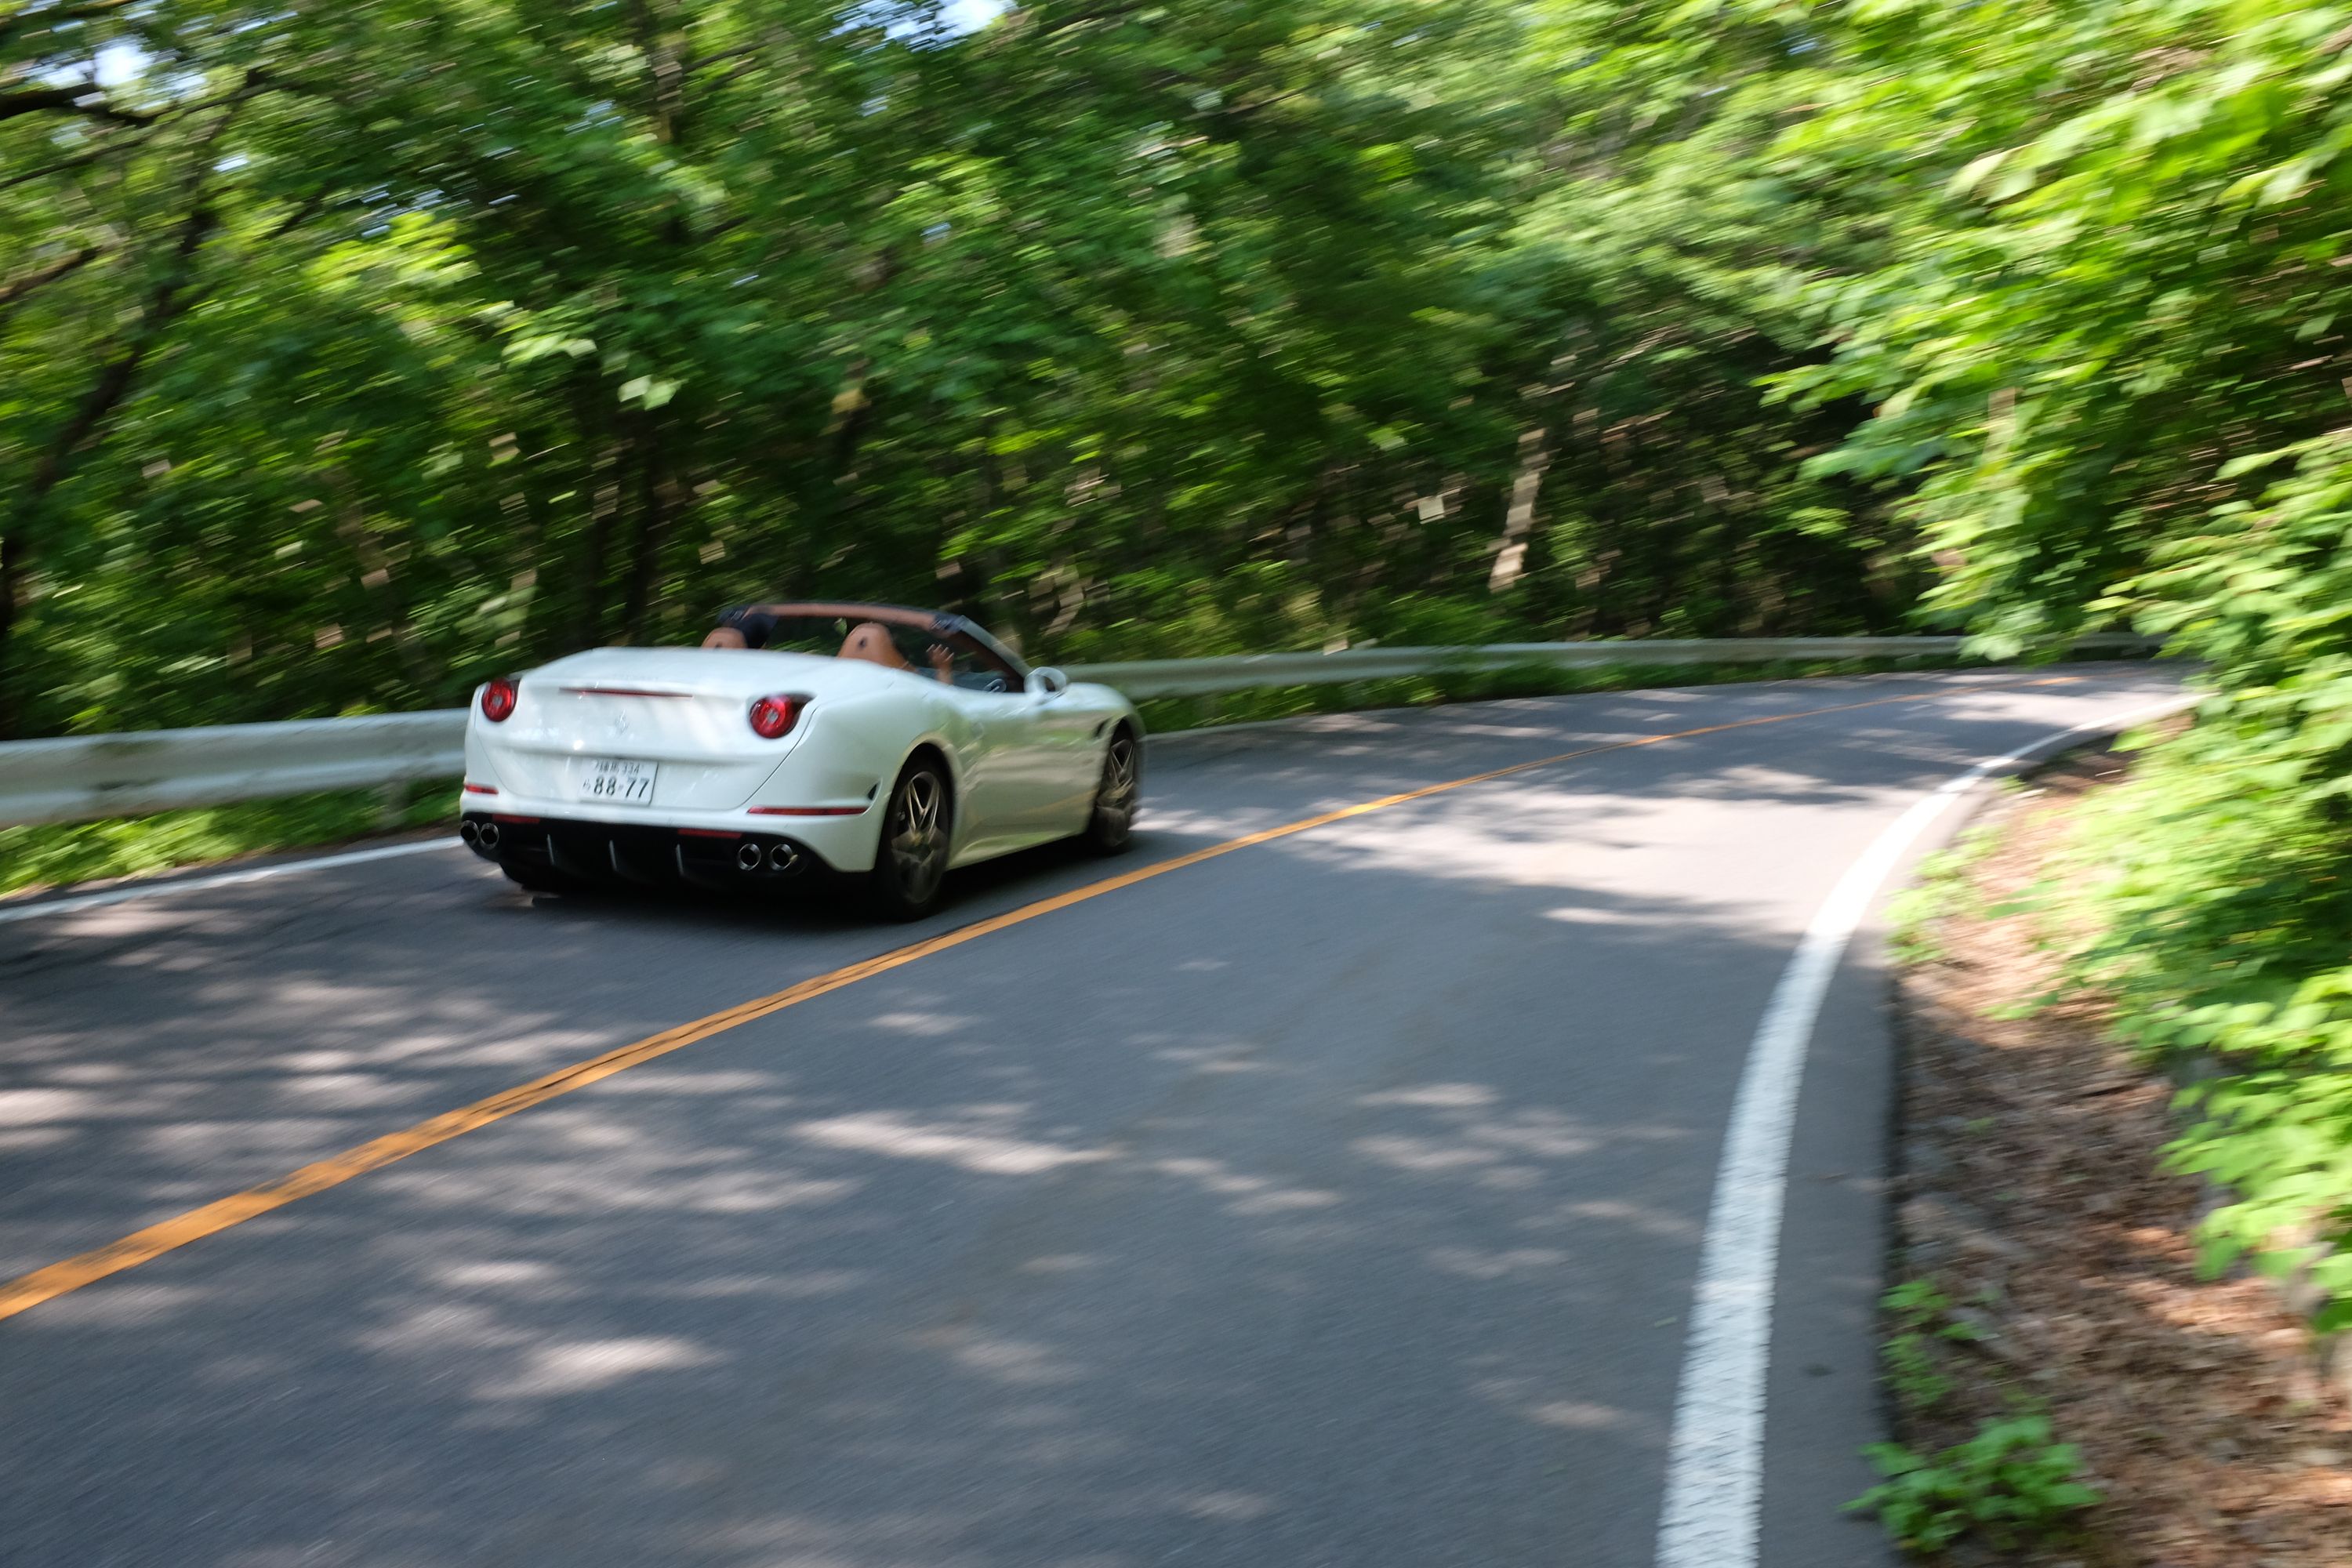 A white Ferrari California driven through the forest in early morning light.